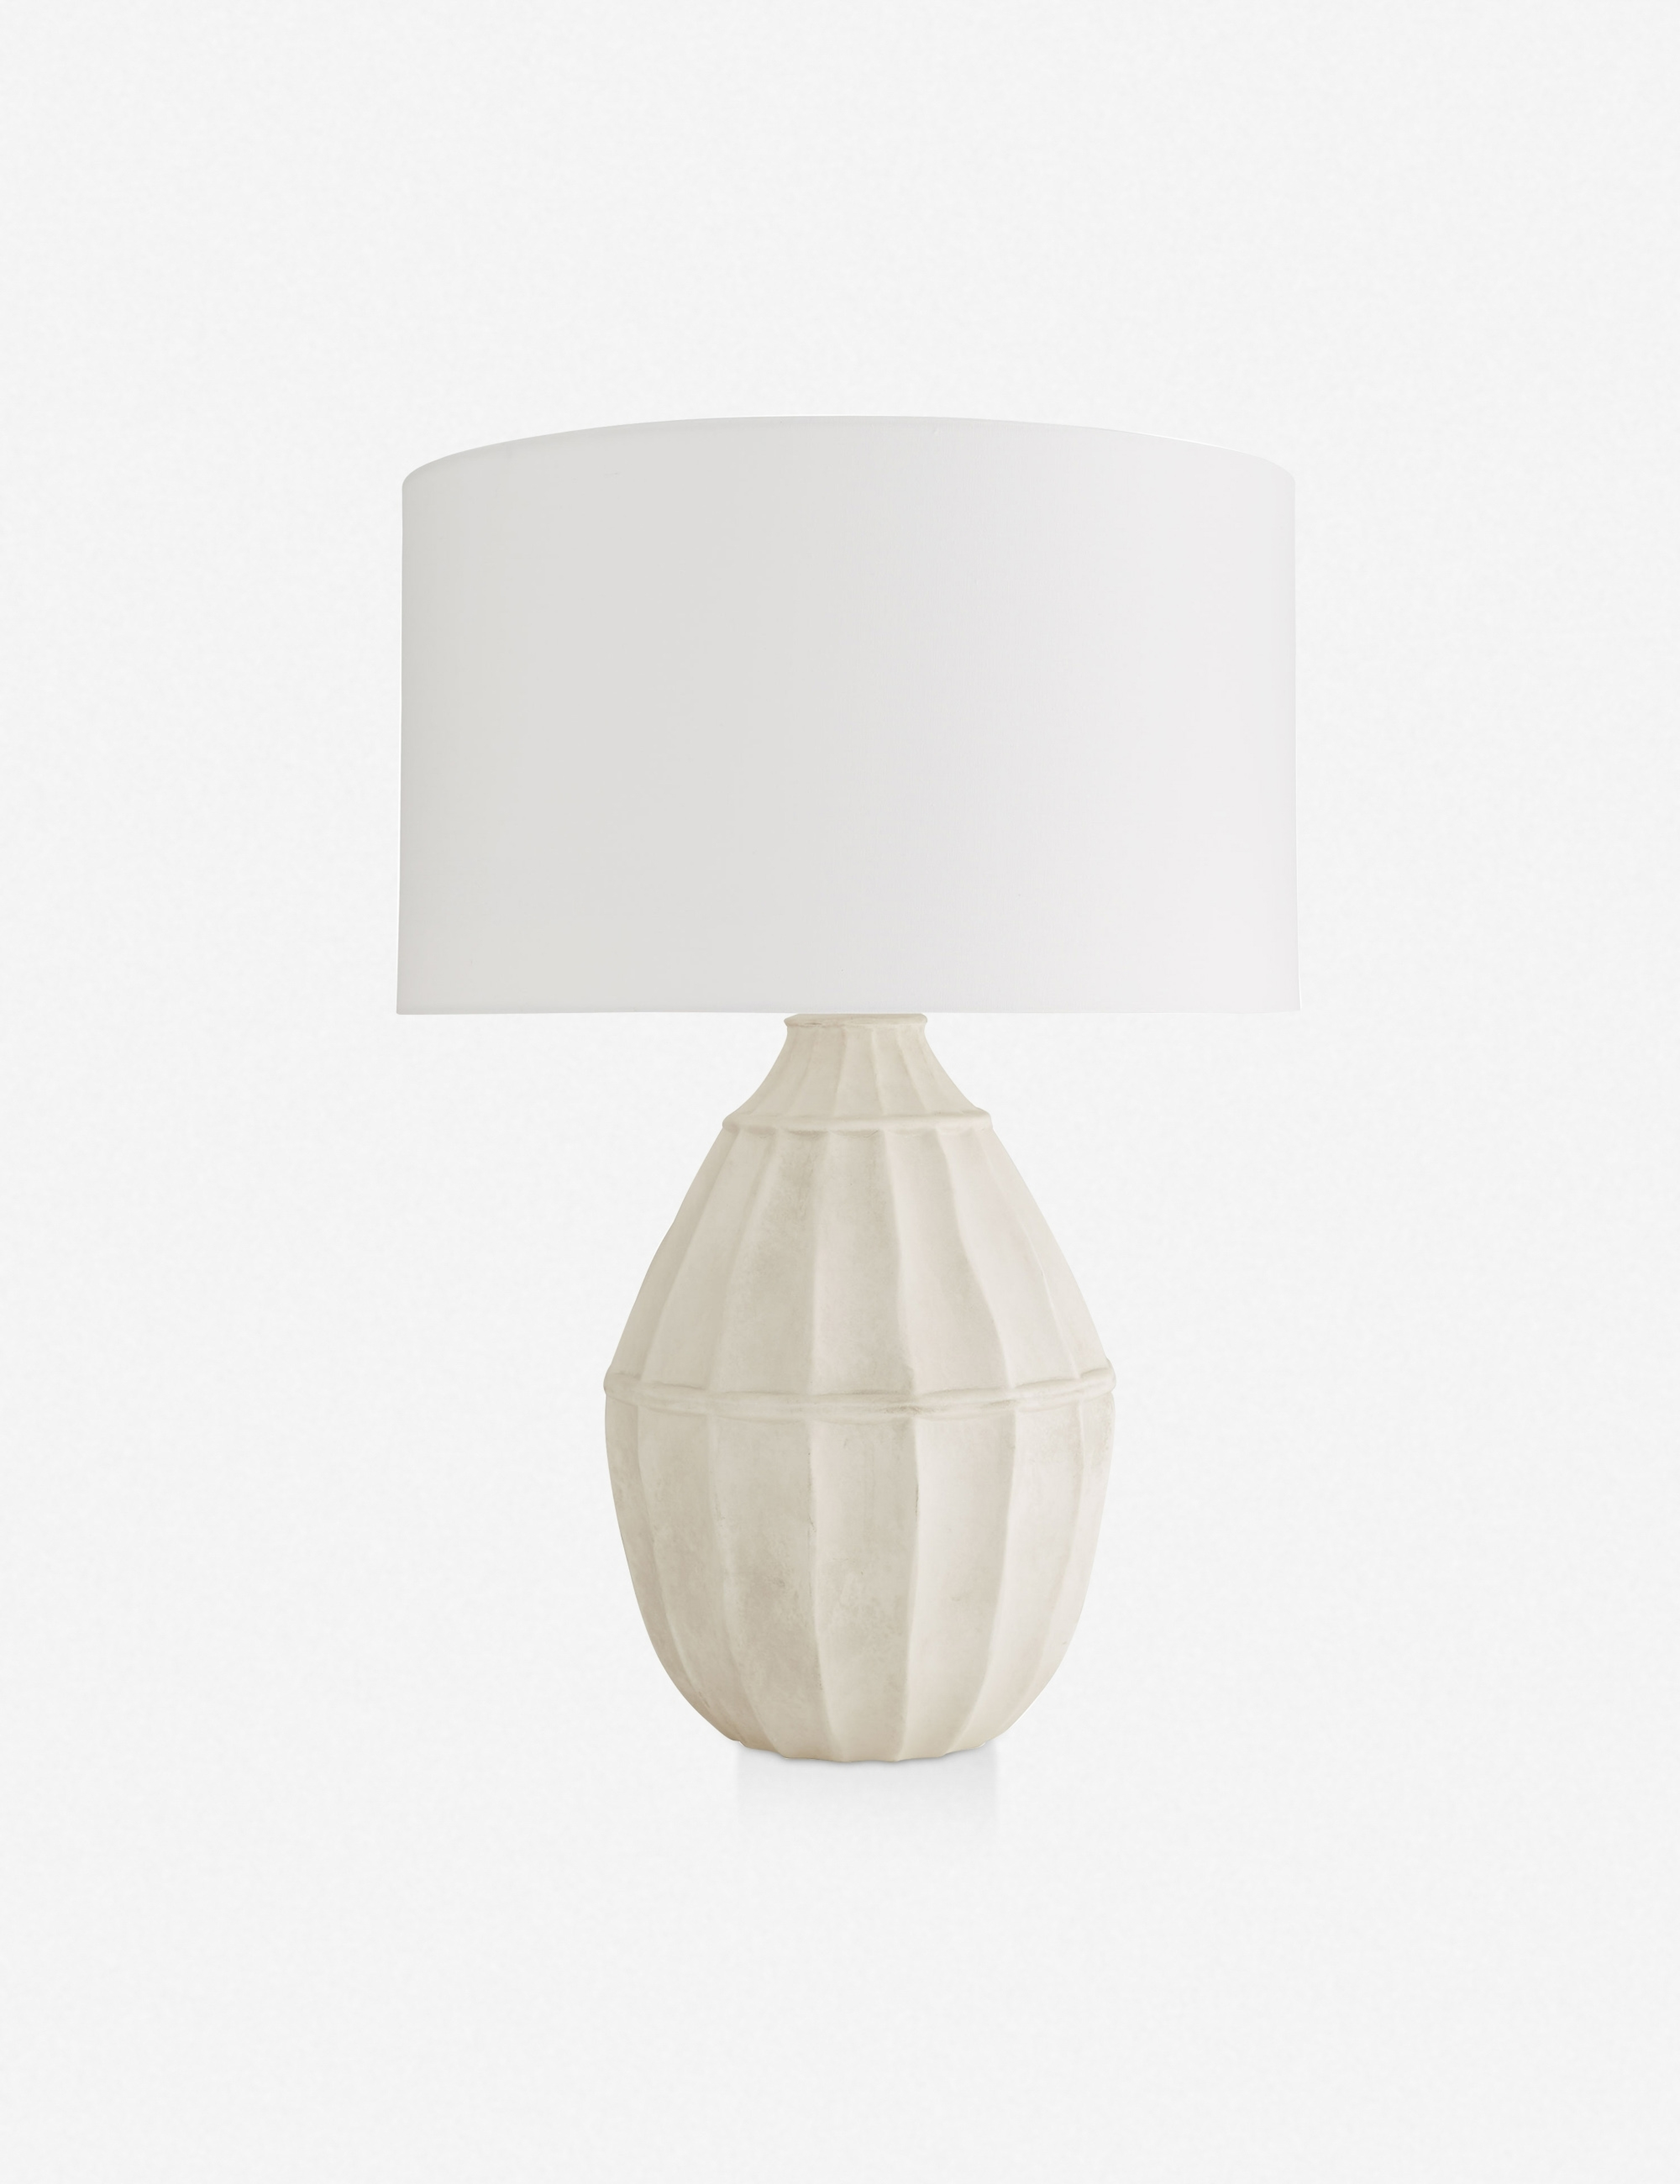 Tangier Table Lamp by Beth Webb for Arteriors - Lulu and Georgia